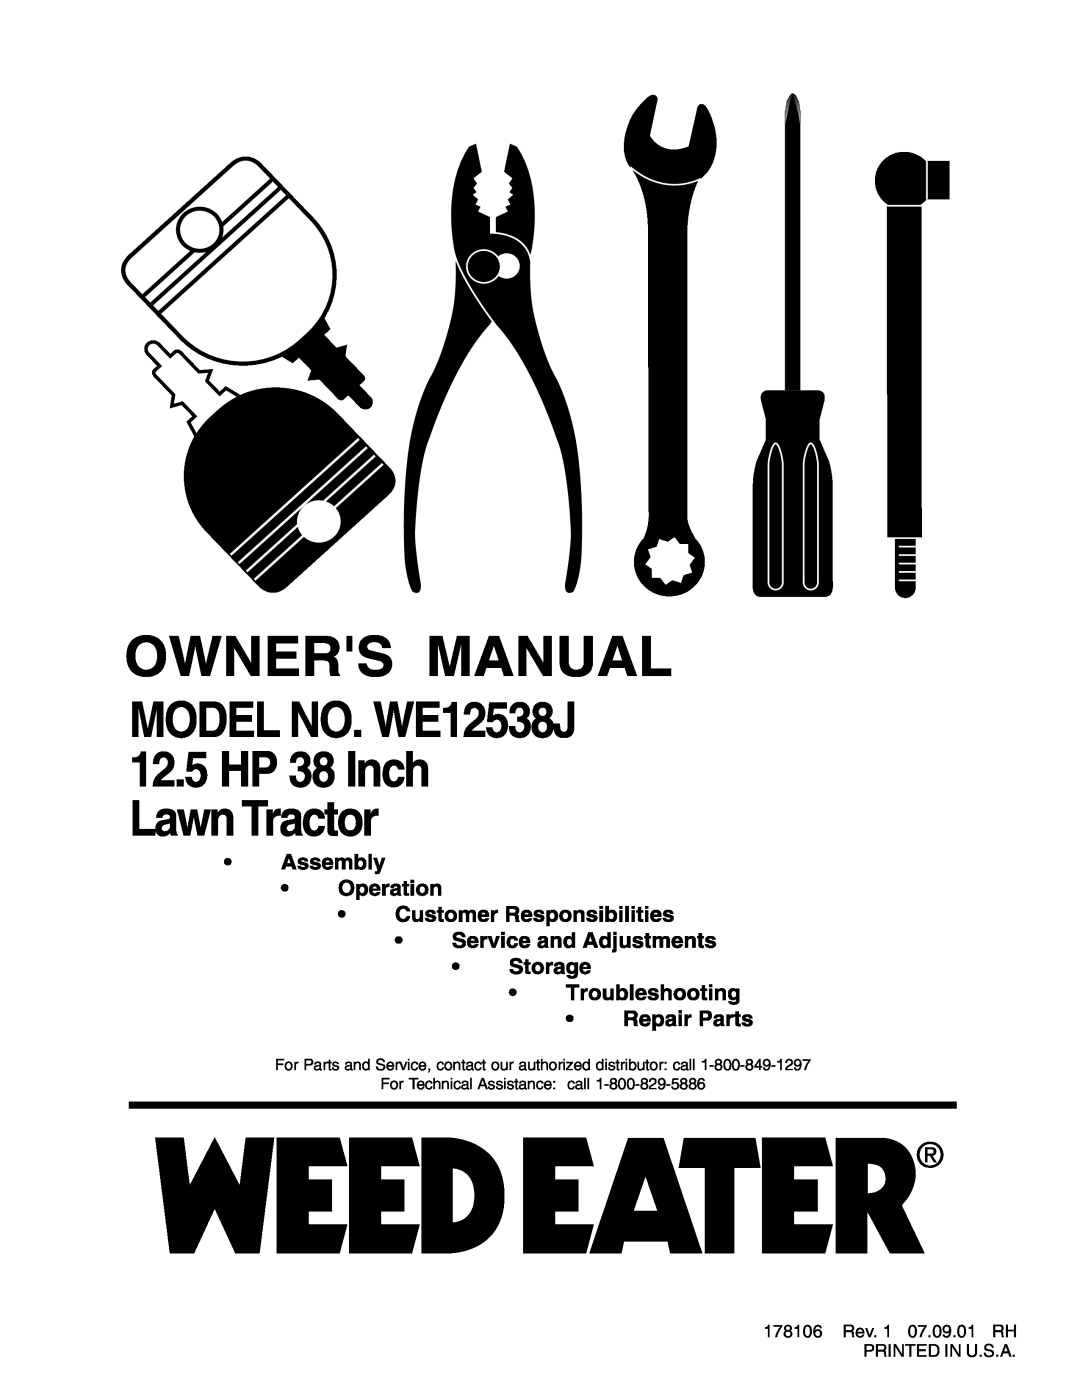 Weed Eater manual MODEL NO. WE12538J 12.5HP 38 Inch LawnTractor 